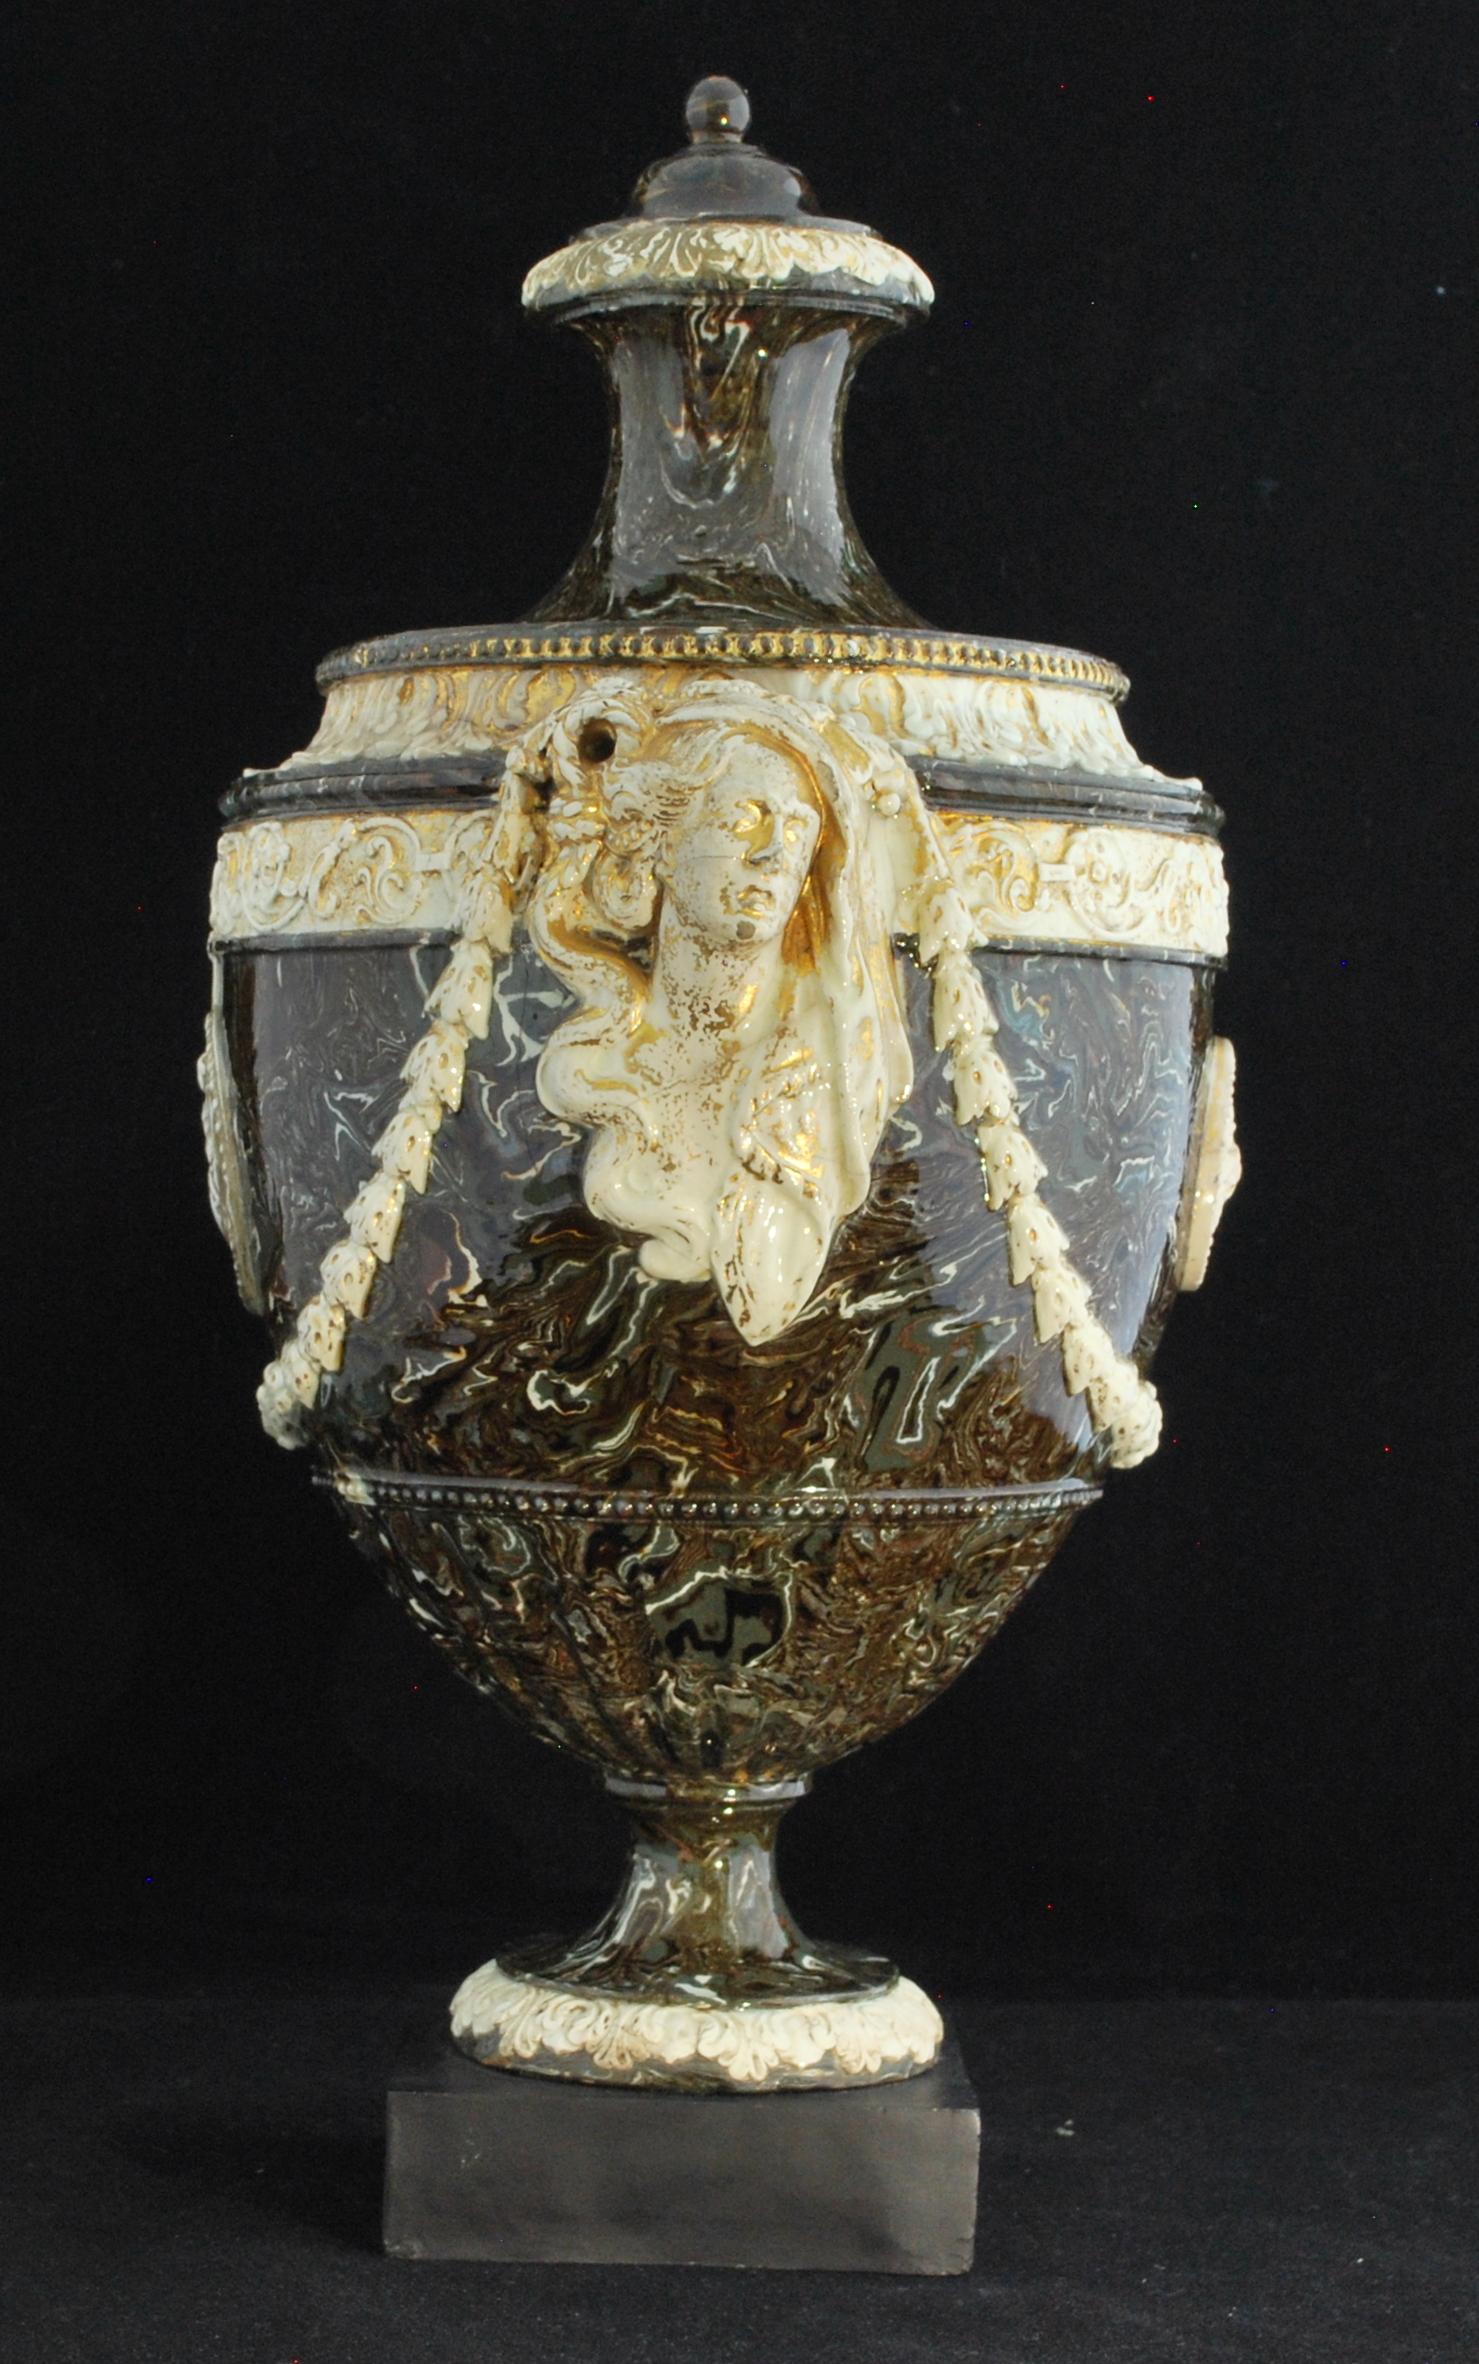 Shield-shaped vase, decorated to simulate semi-precious stone and enhanced with gilding.